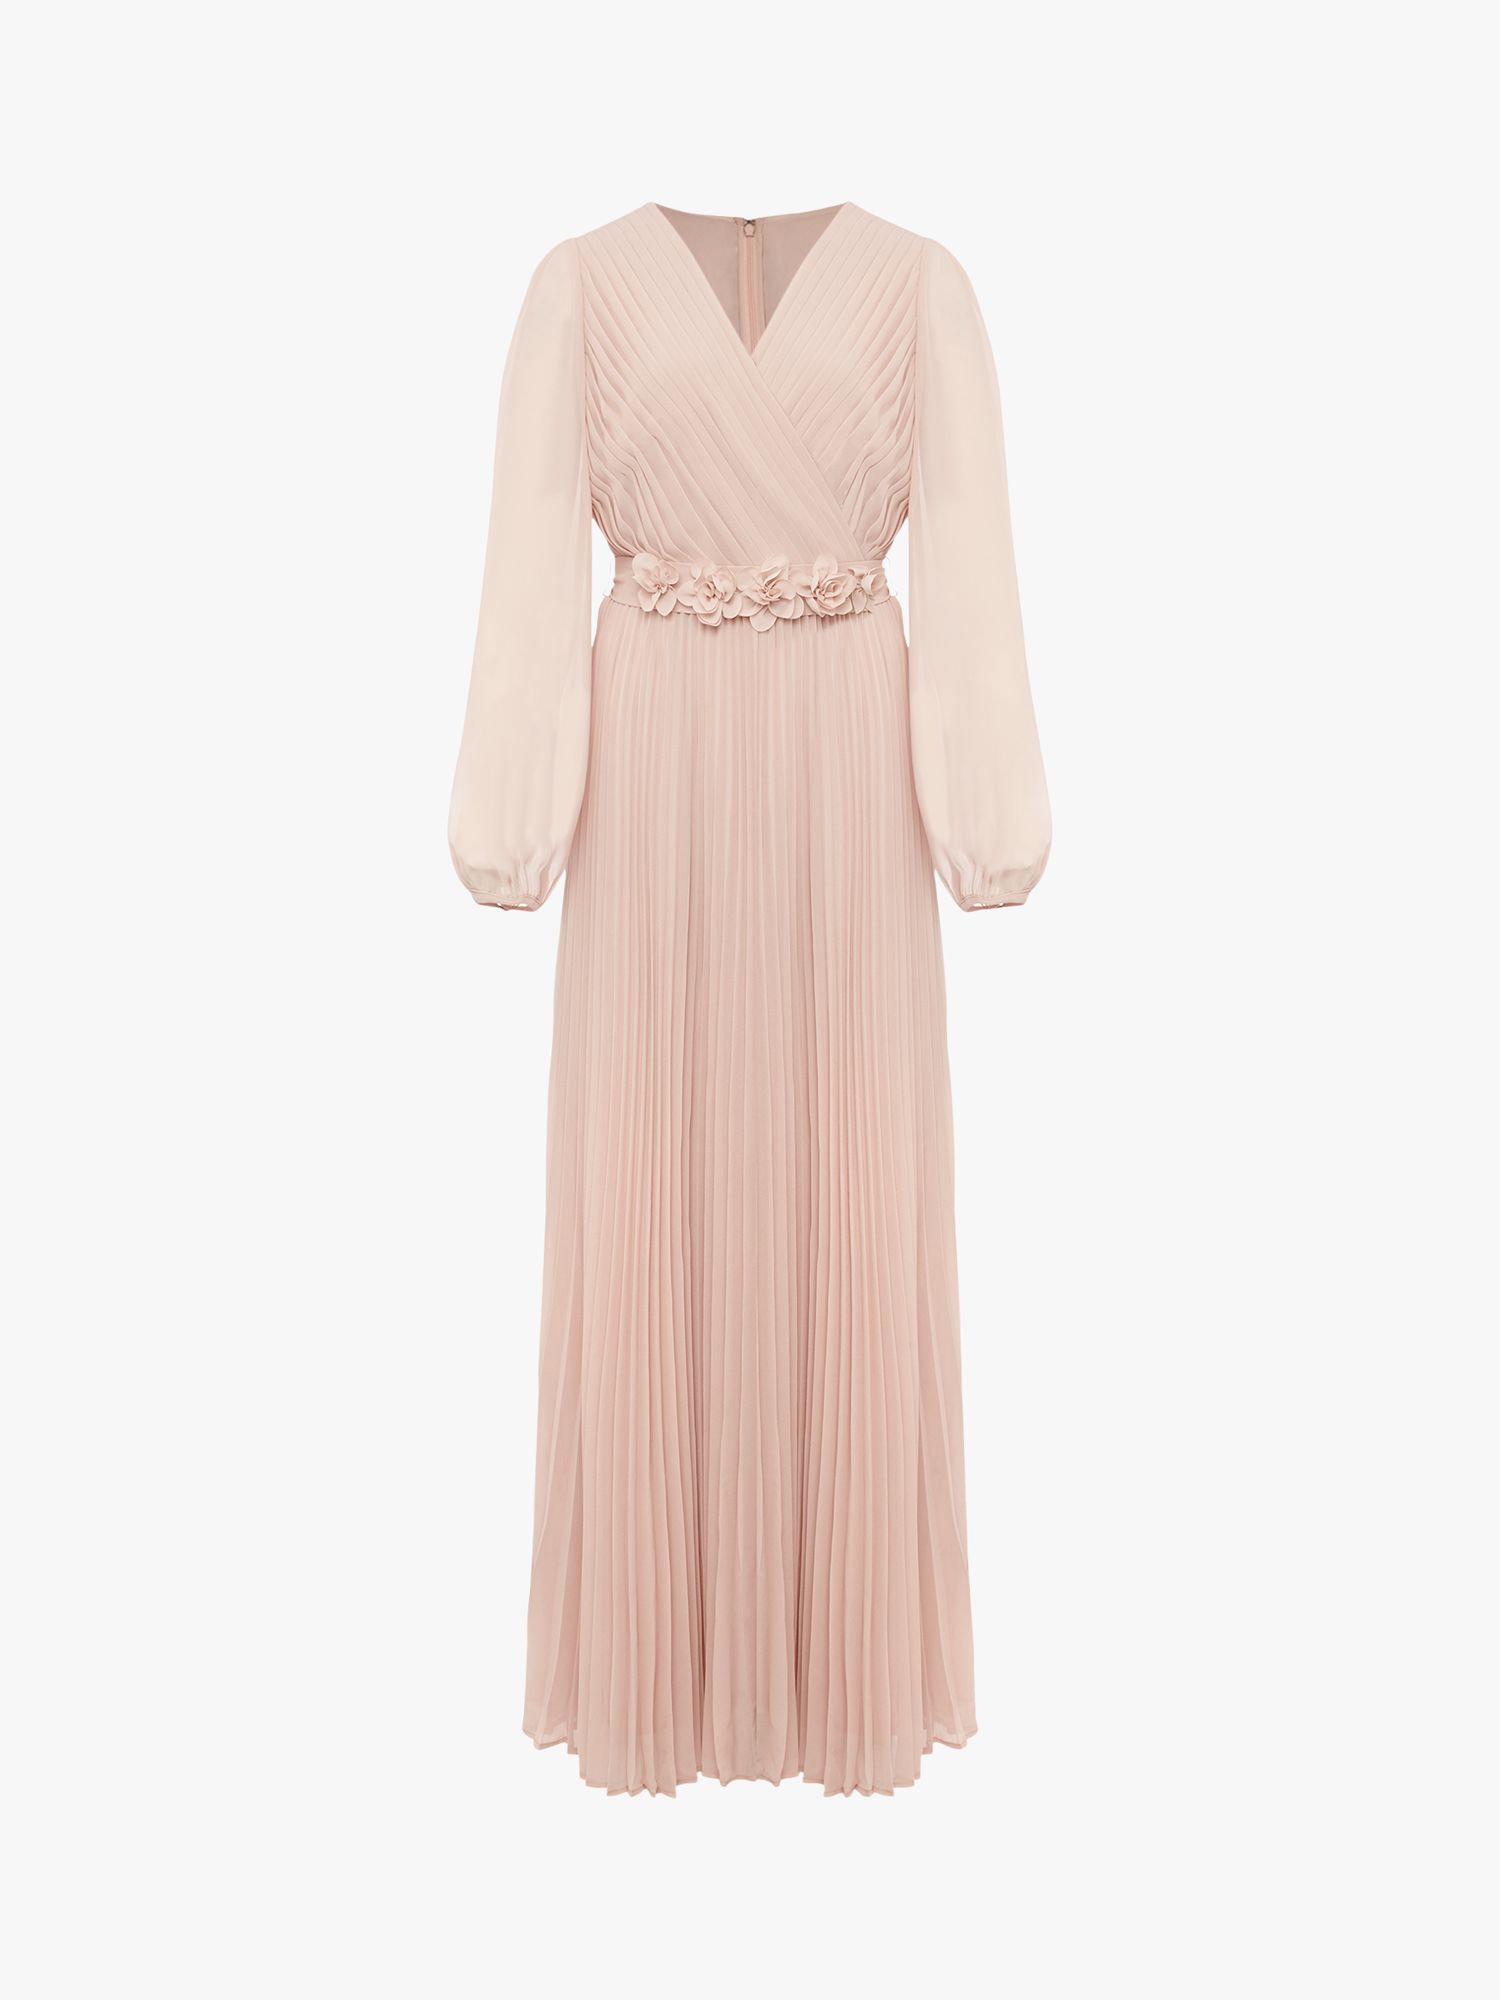 Phase Eight Alecia Maxi Dress, Antique Rose at John Lewis & Partners